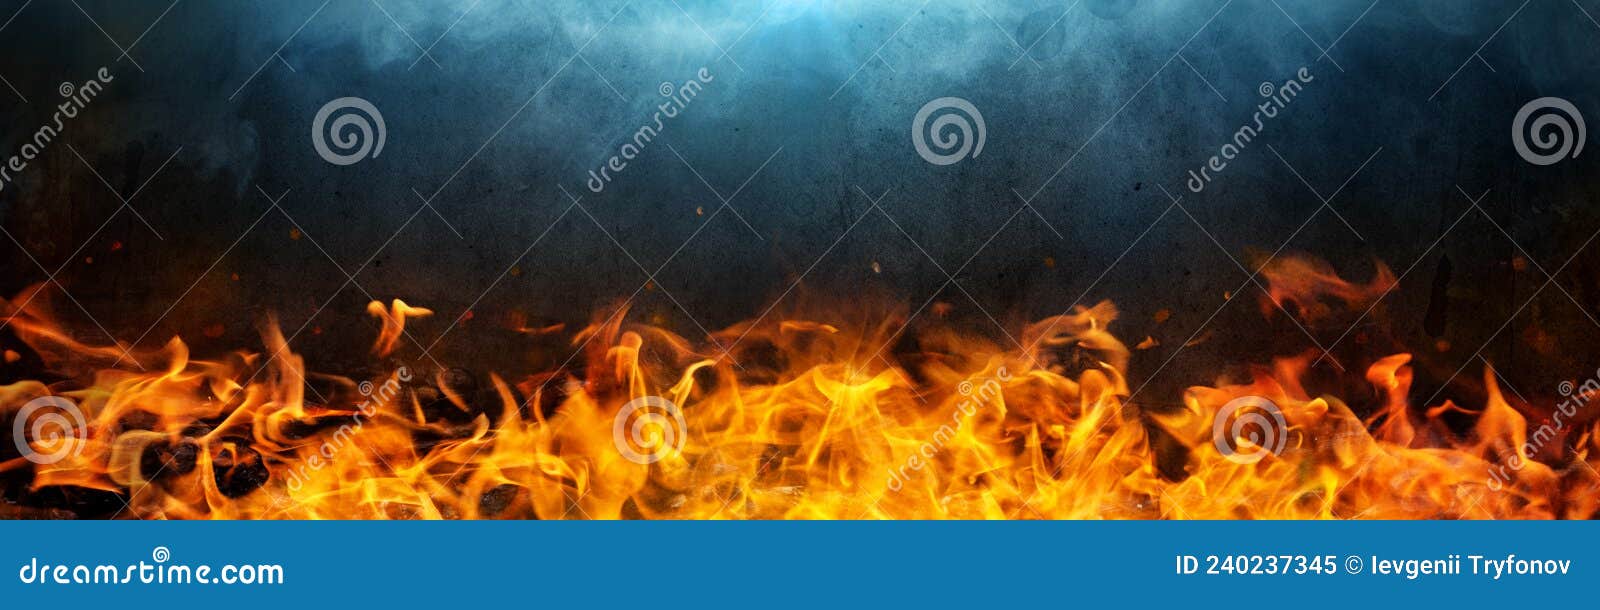 Flame, Fire on the Background. Black Walls and Smoke Stock Image - Image of  nature, paper: 240237345